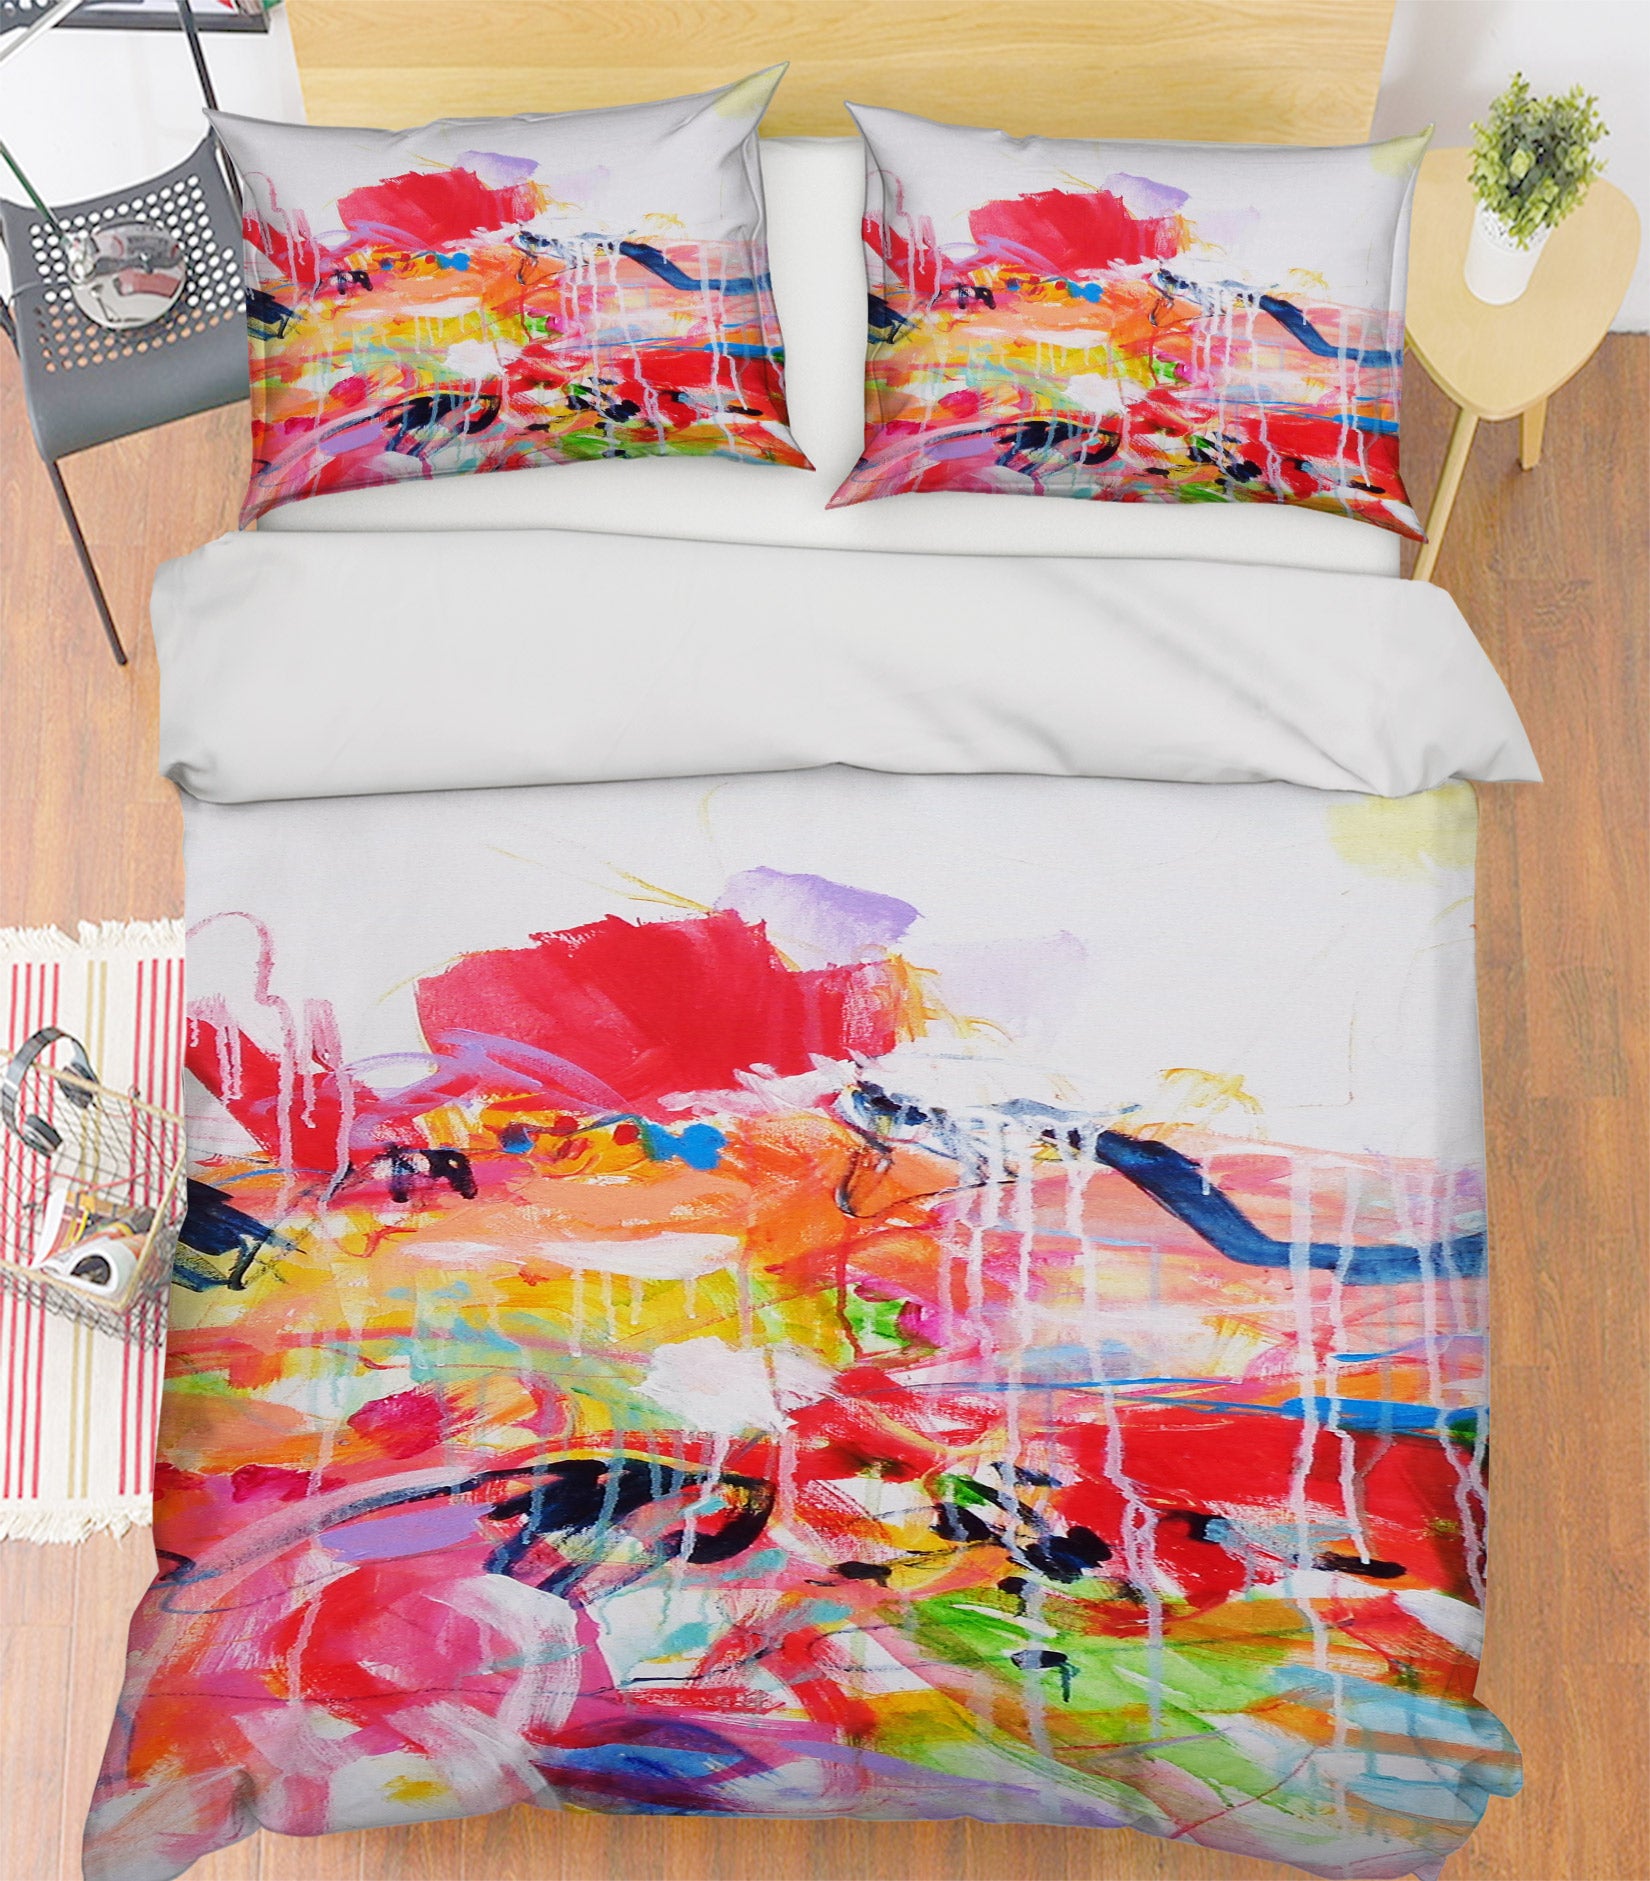 3D Pink Watercolor 1199 Misako Chida Bedding Bed Pillowcases Quilt Cover Duvet Cover